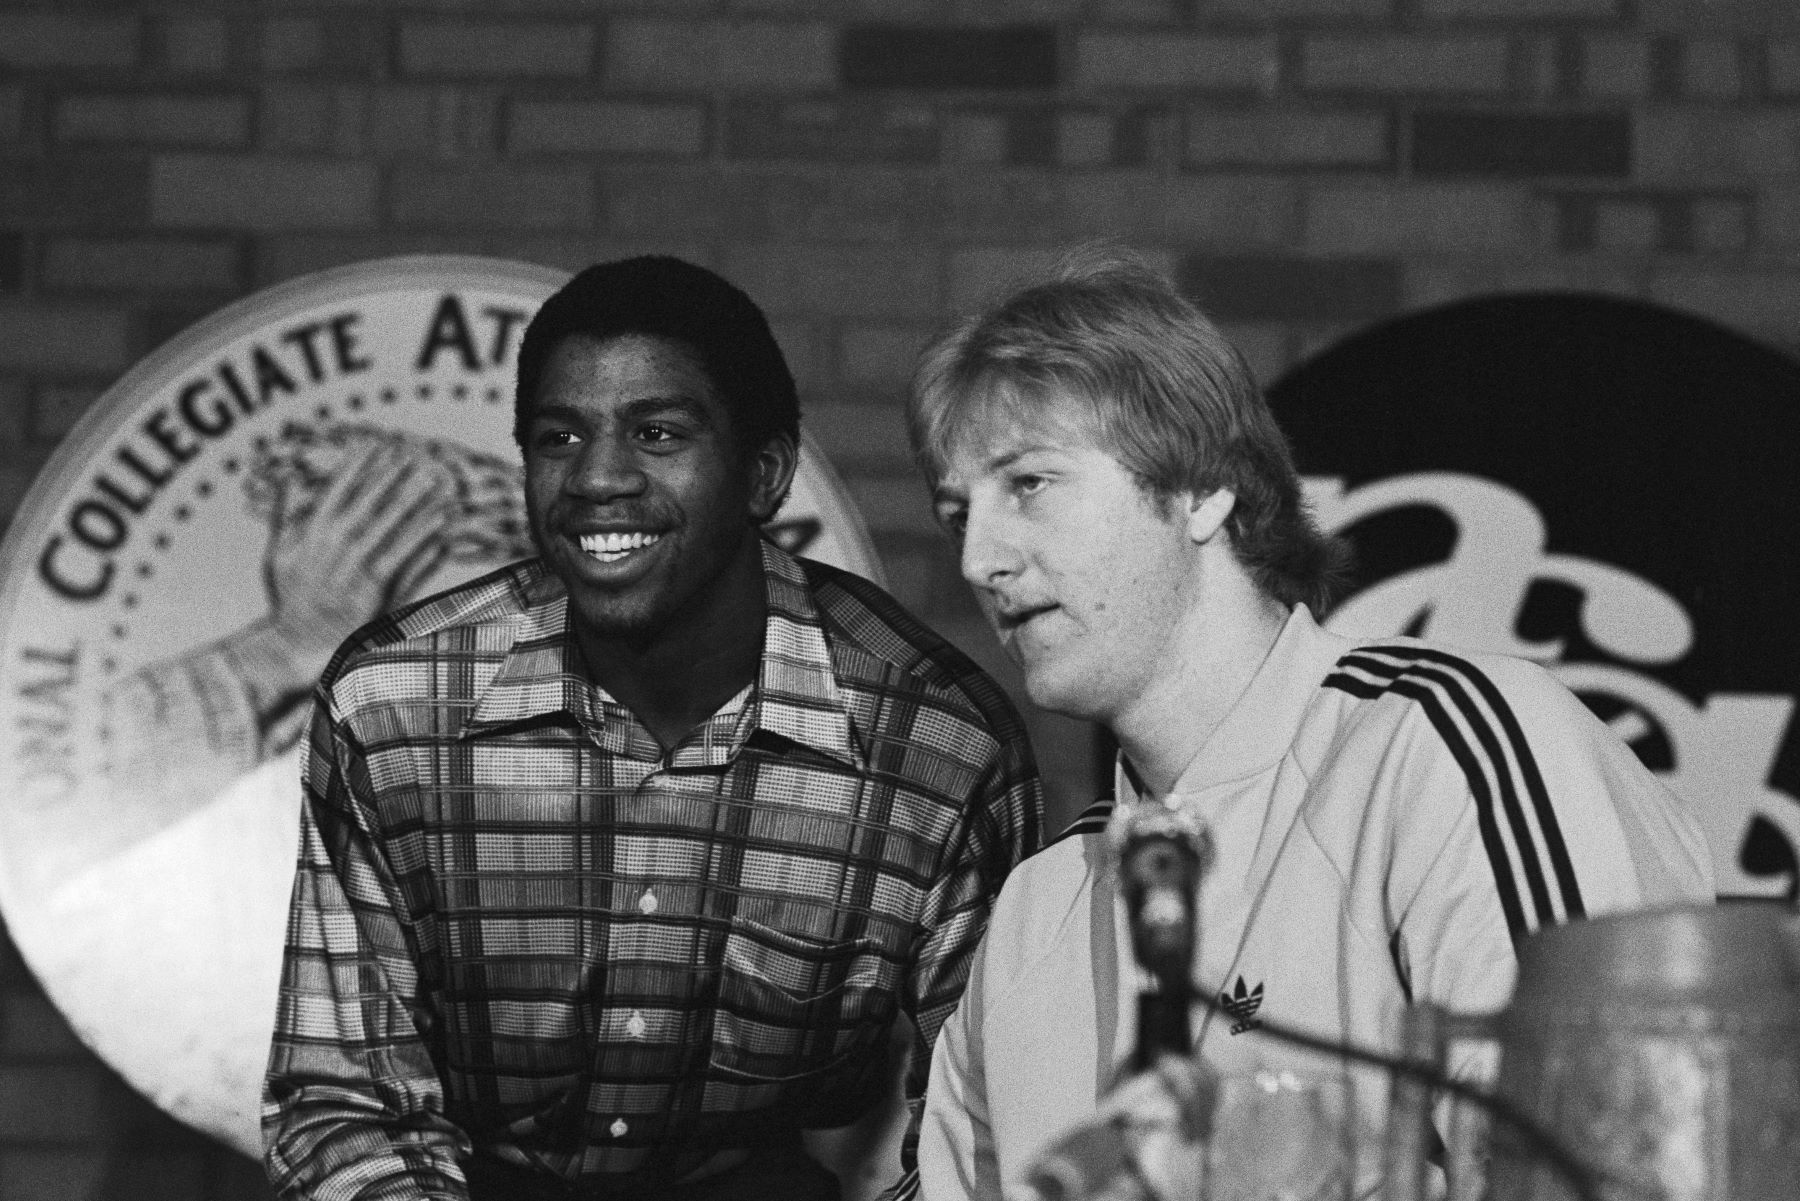 Normal Anuncio Galleta A Shoe Commercial Is What Finally Helped Larry Bird and Magic Johnson  Become Friends